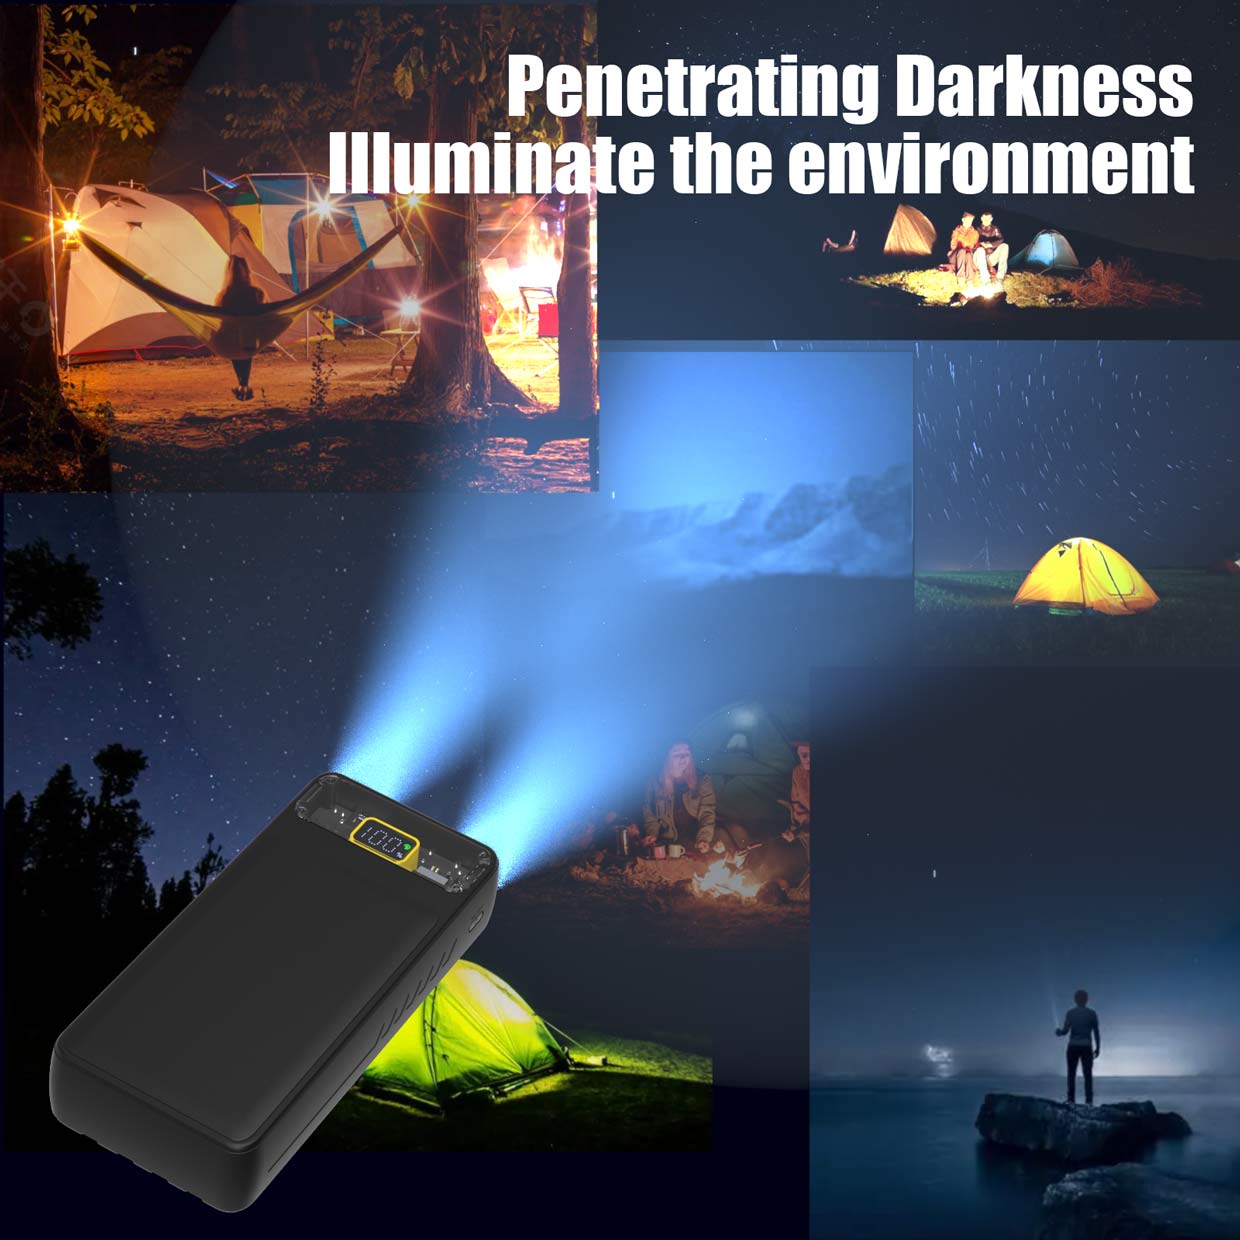 Flashlight 26800mAh, Power Bank, Quick Charge 22.5W & PD20W, Portable Charger, Built-in Cables, USB C External Battery Pack For iphone, ipad, Samsung, Huawei, Smartphones etc.